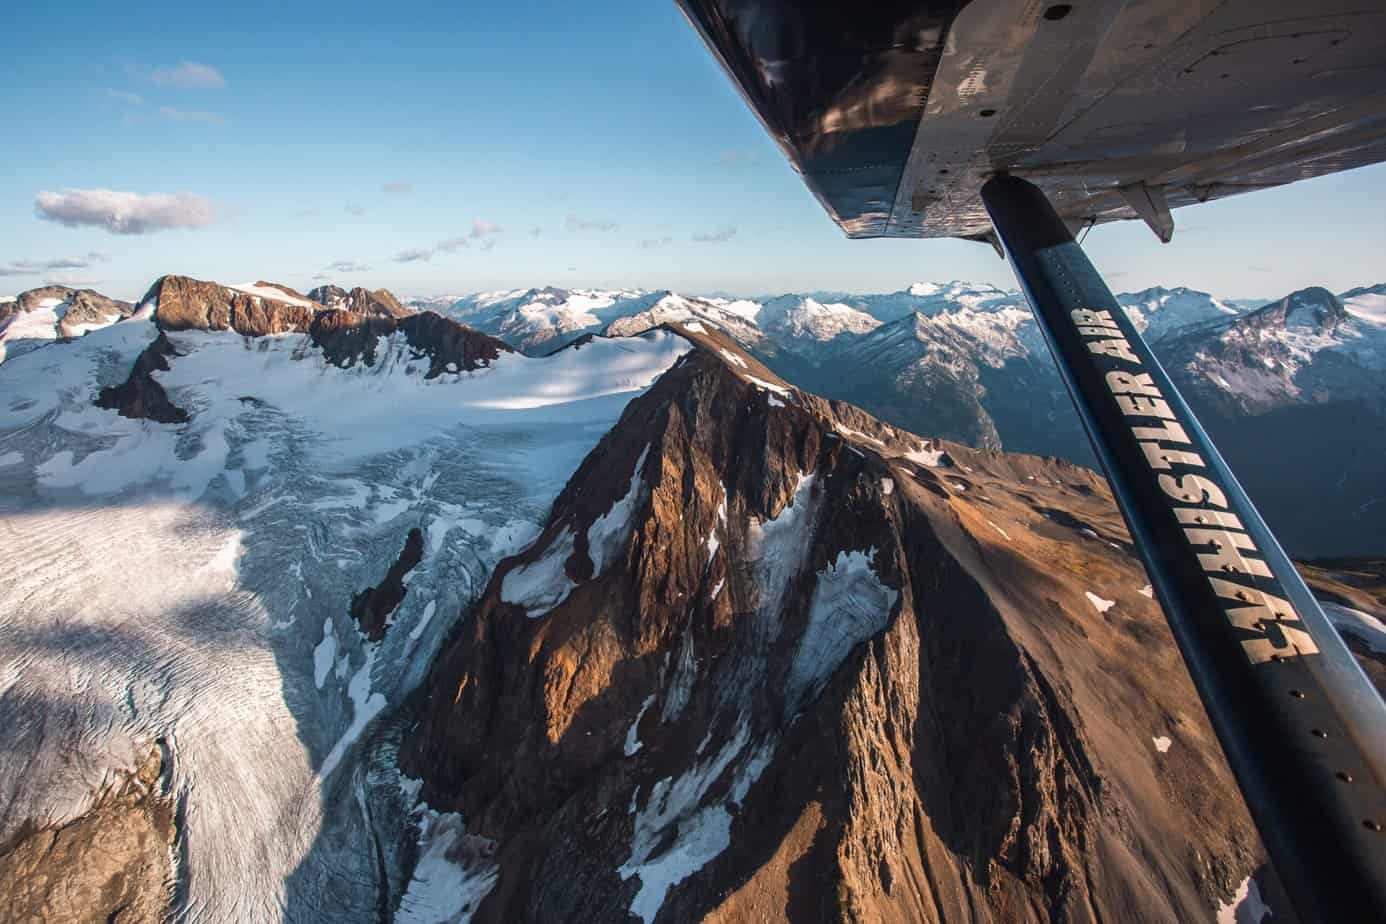 Flying from Vancouver to Whistler on a float plane is the quickest way